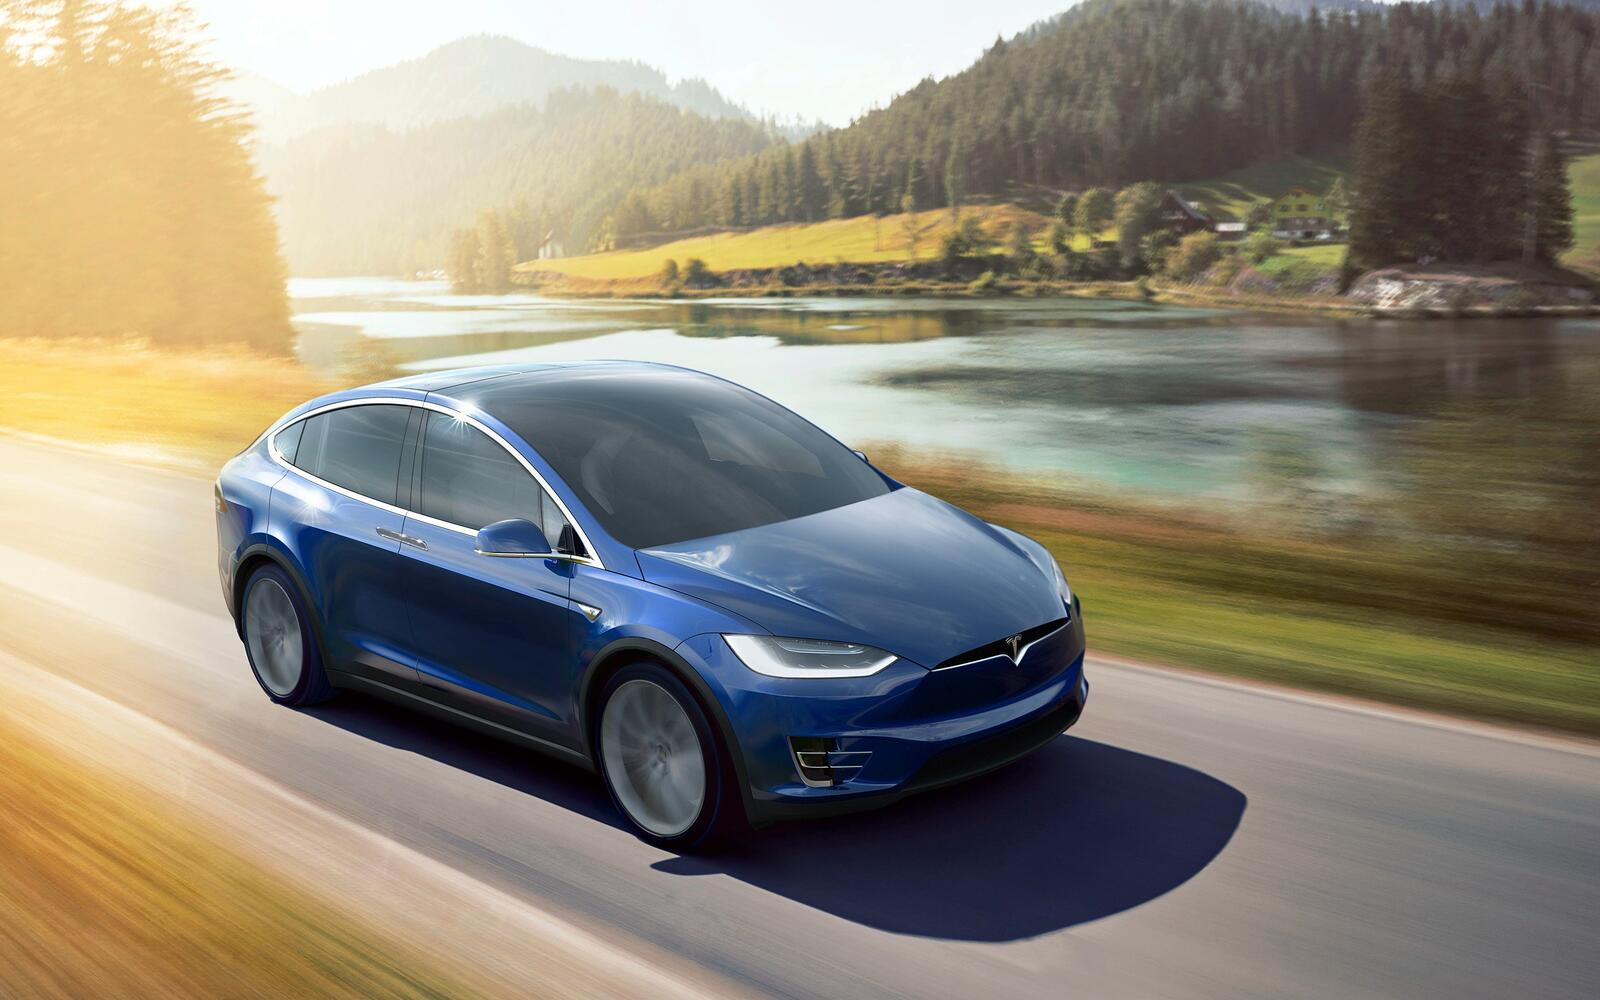 Free photo A Tesla Model X speeds down a highway with a river in the background